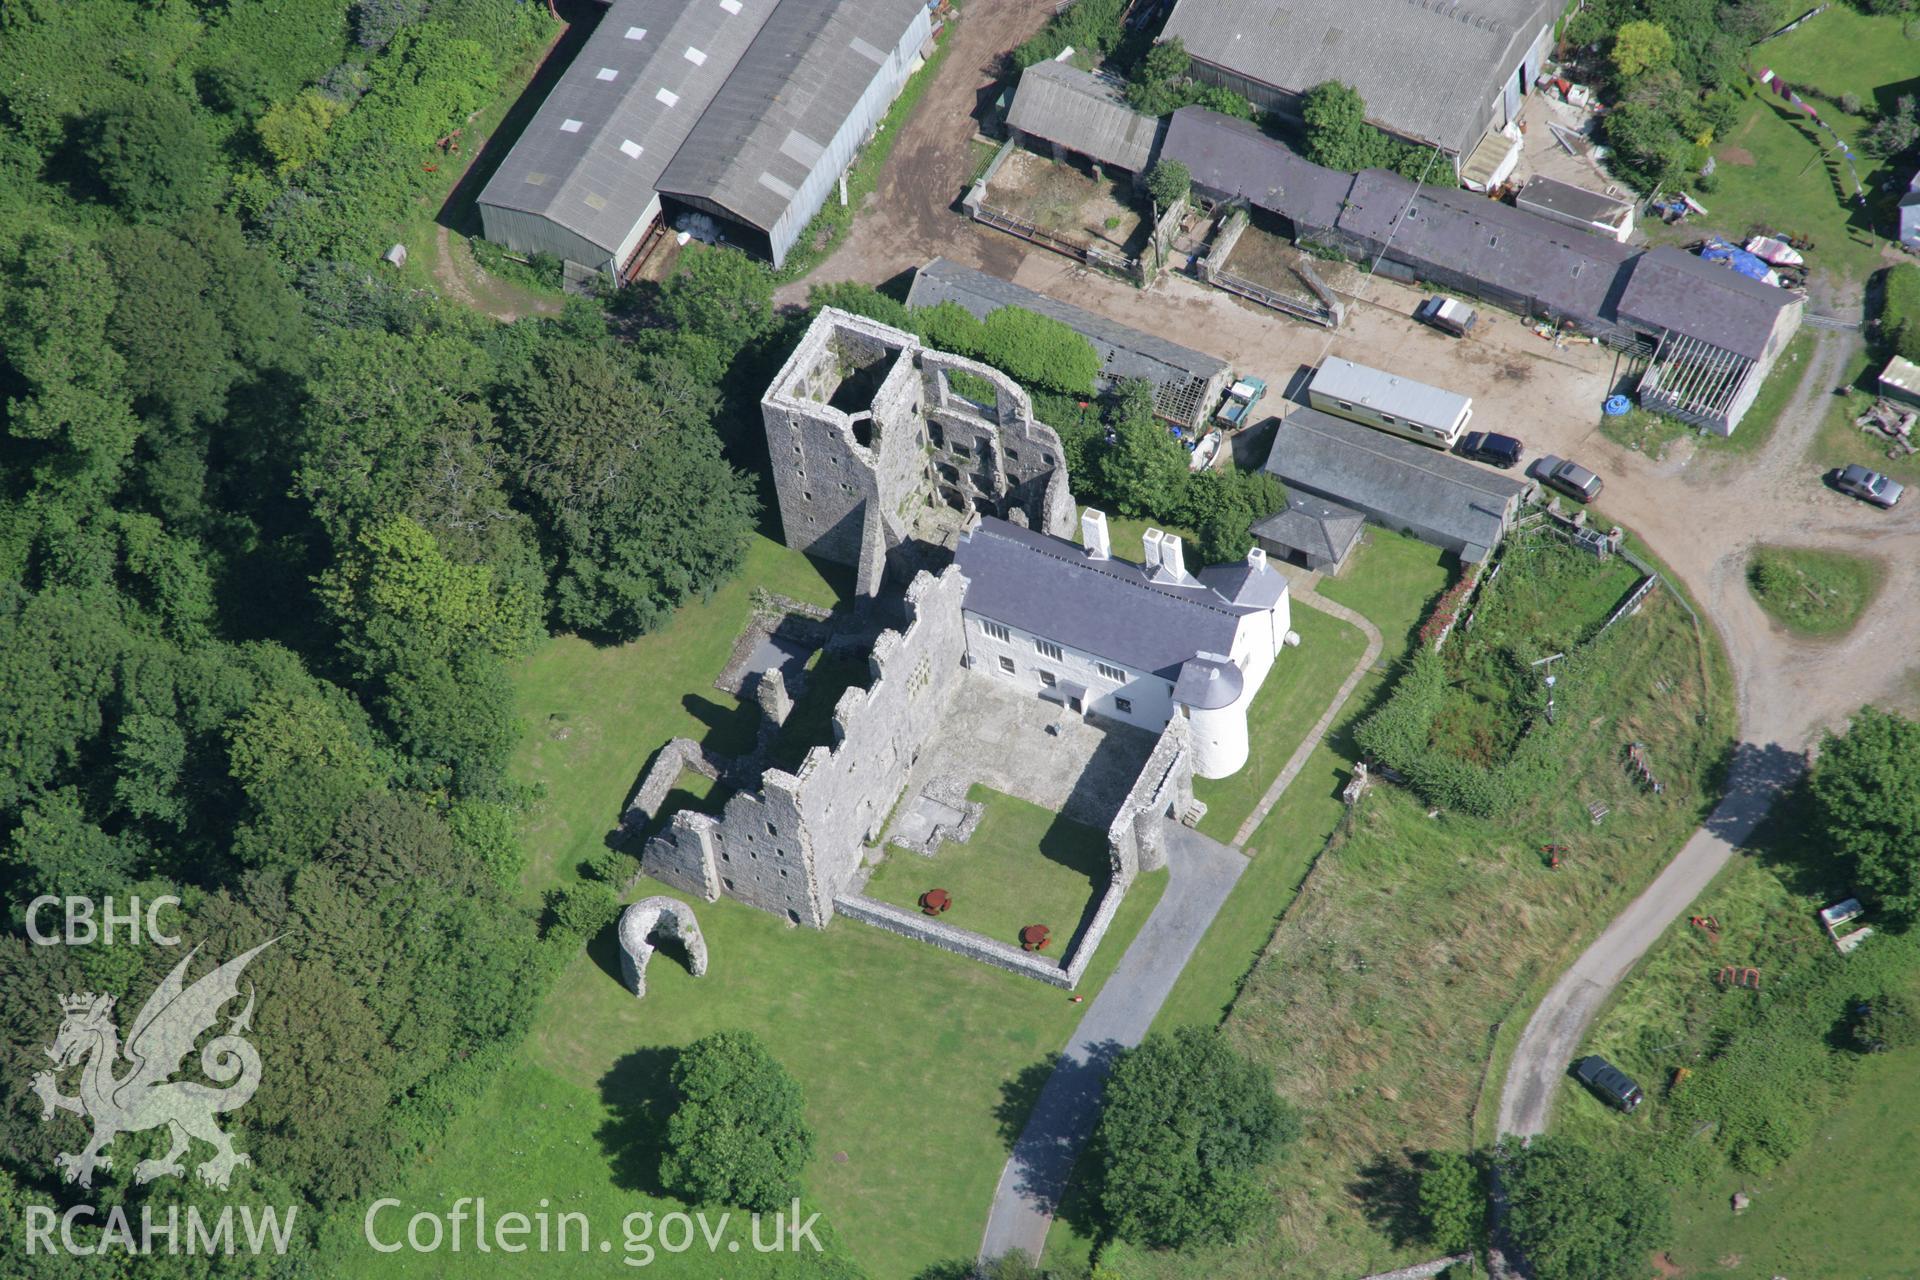 RCAHMW colour oblique aerial photograph of Oxwich Castle. Taken on 11 July 2006 by Toby Driver.